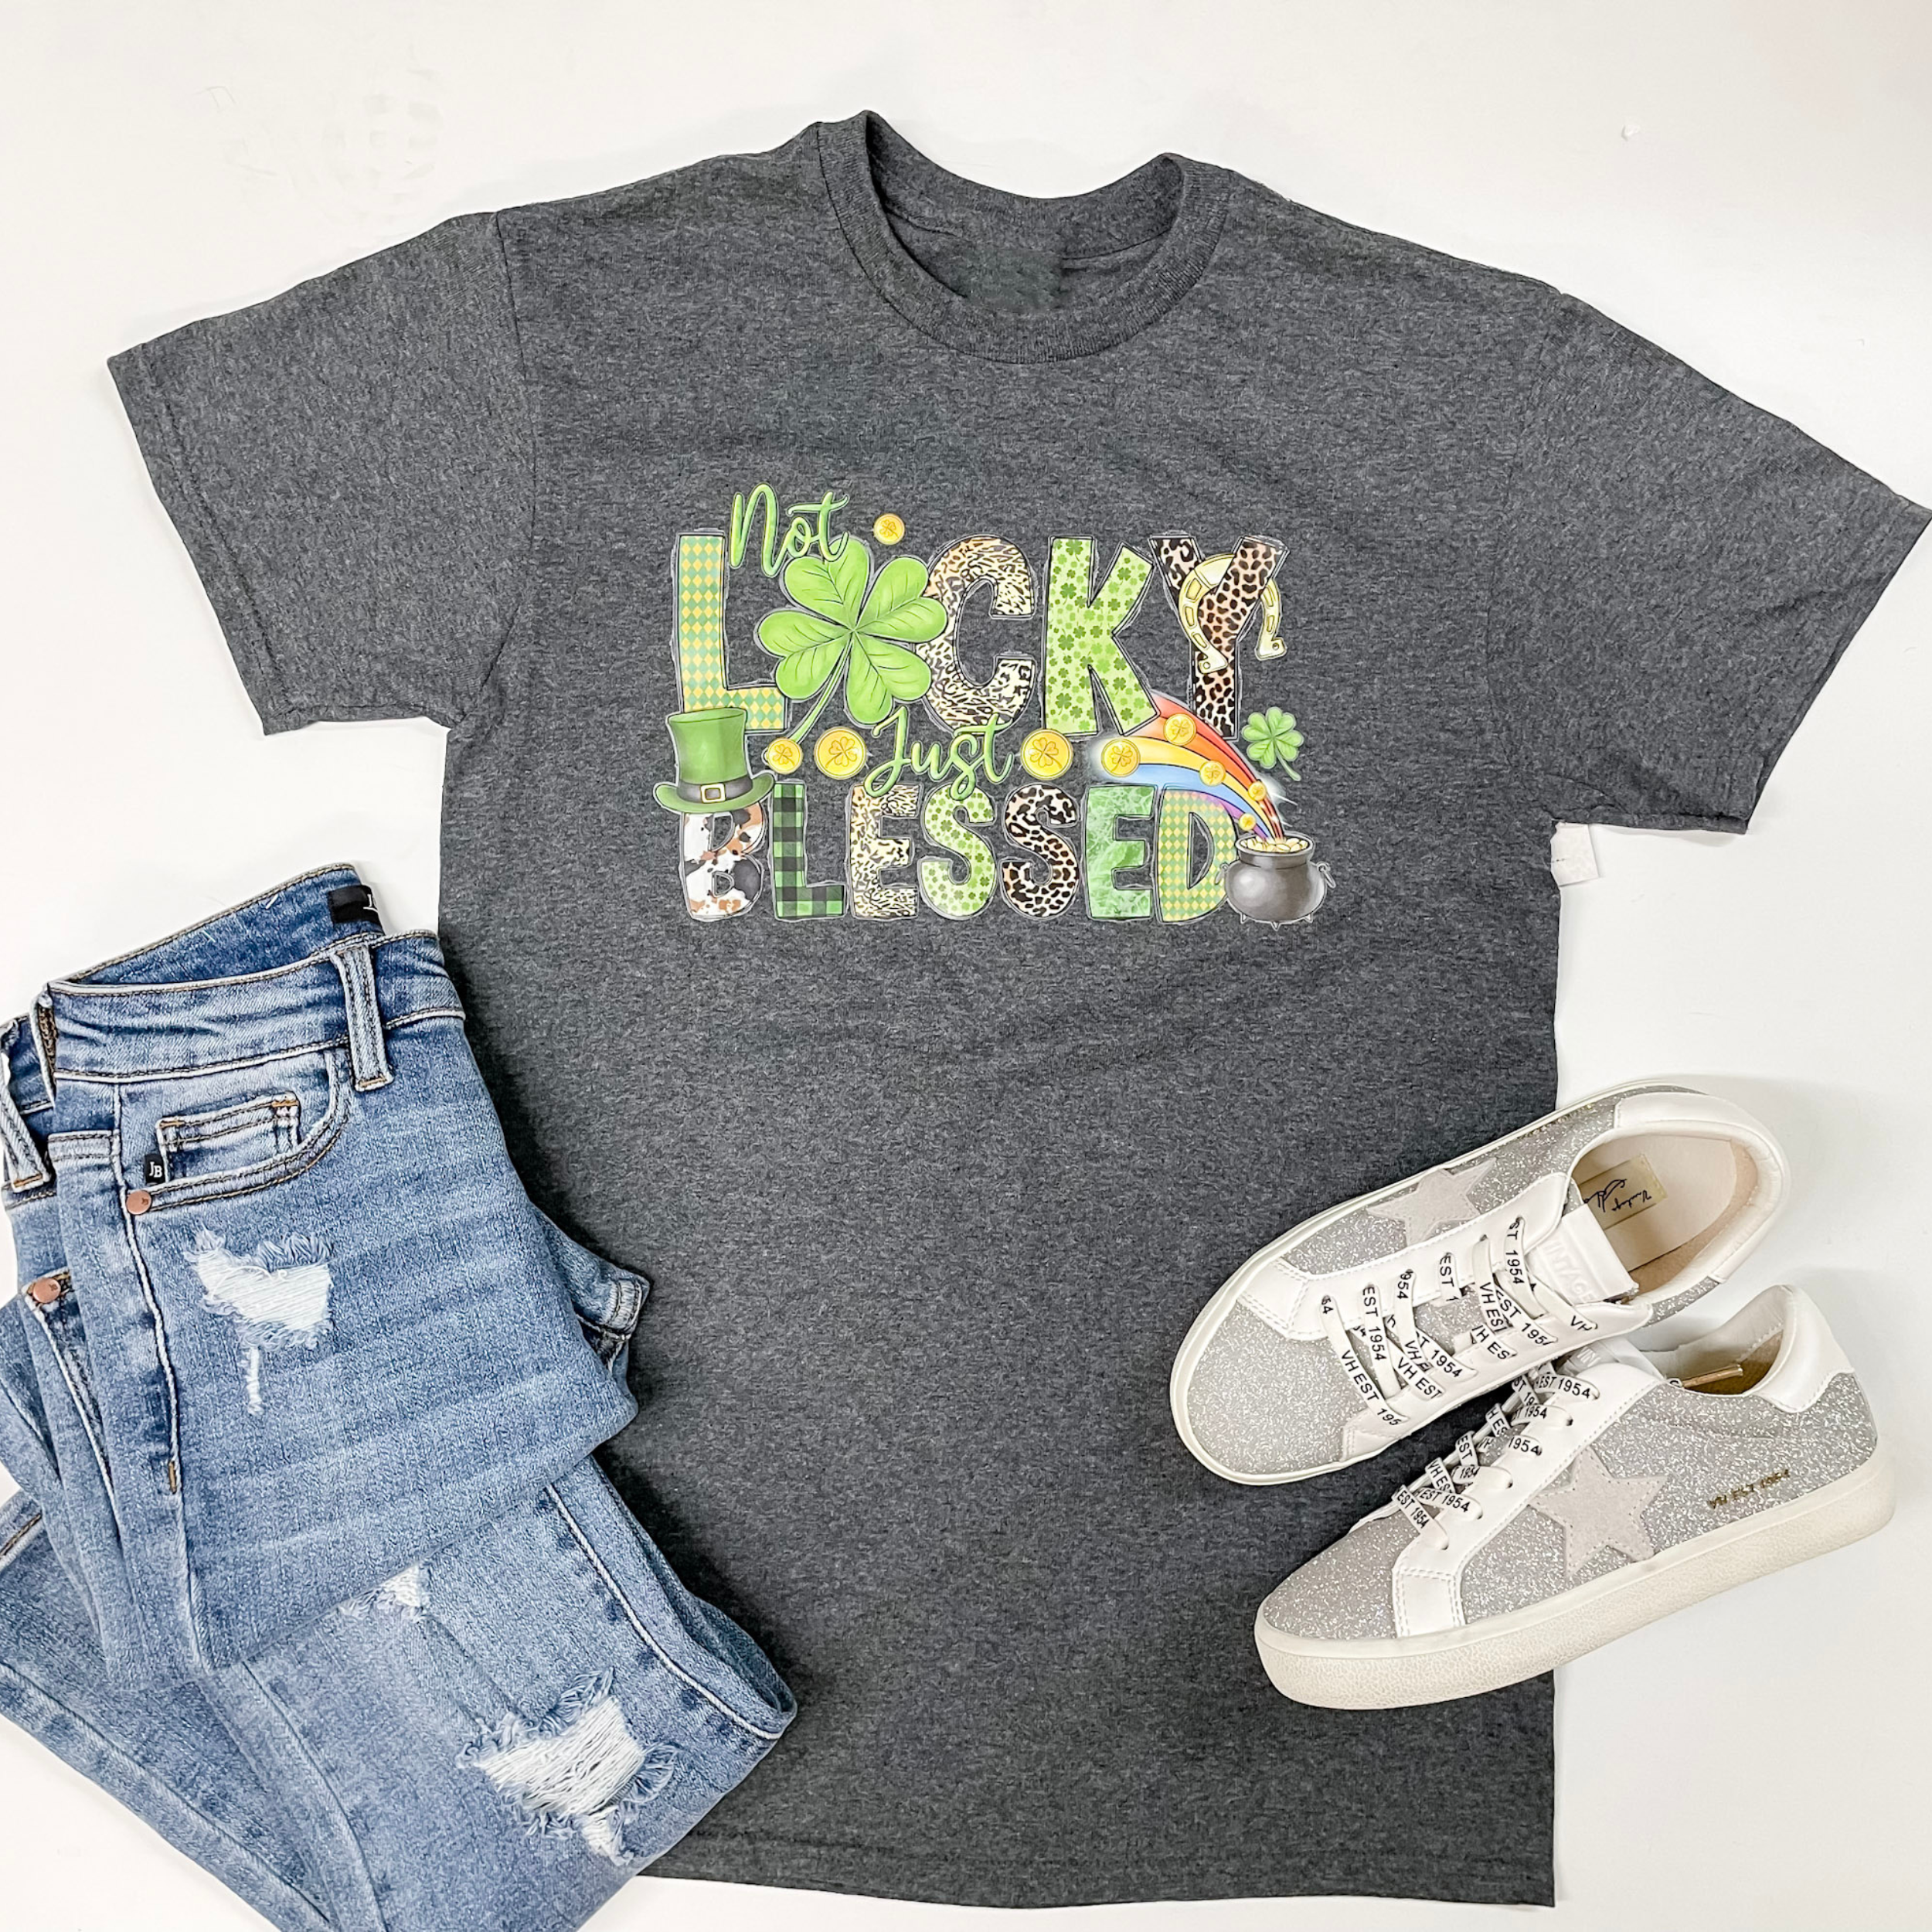 A gray tee is laid out on a white back ground. In the center of the tee are the words "Not Lucky Just Blessed." The designs in the letters vary and include designs such as plaid, cheetah, and cowprint. On the bottom left of the picture is a light-wash pair of jeans and on the right is a silver/white pair of sneakers. 